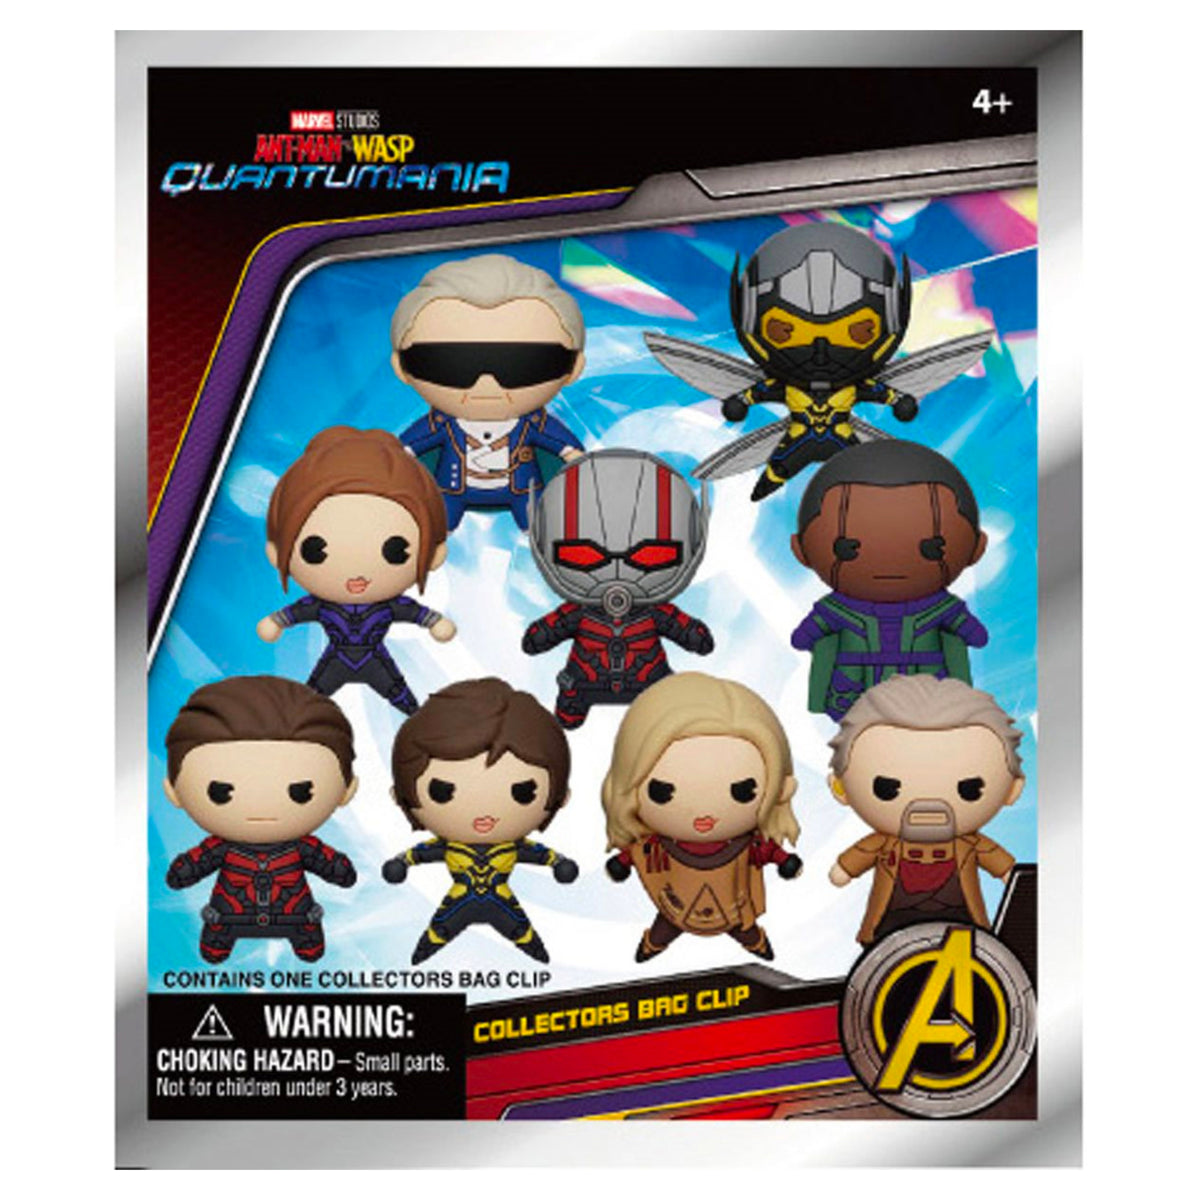 Ant-Man and the Wasp Quantmania Mystery 3D Bag Clip